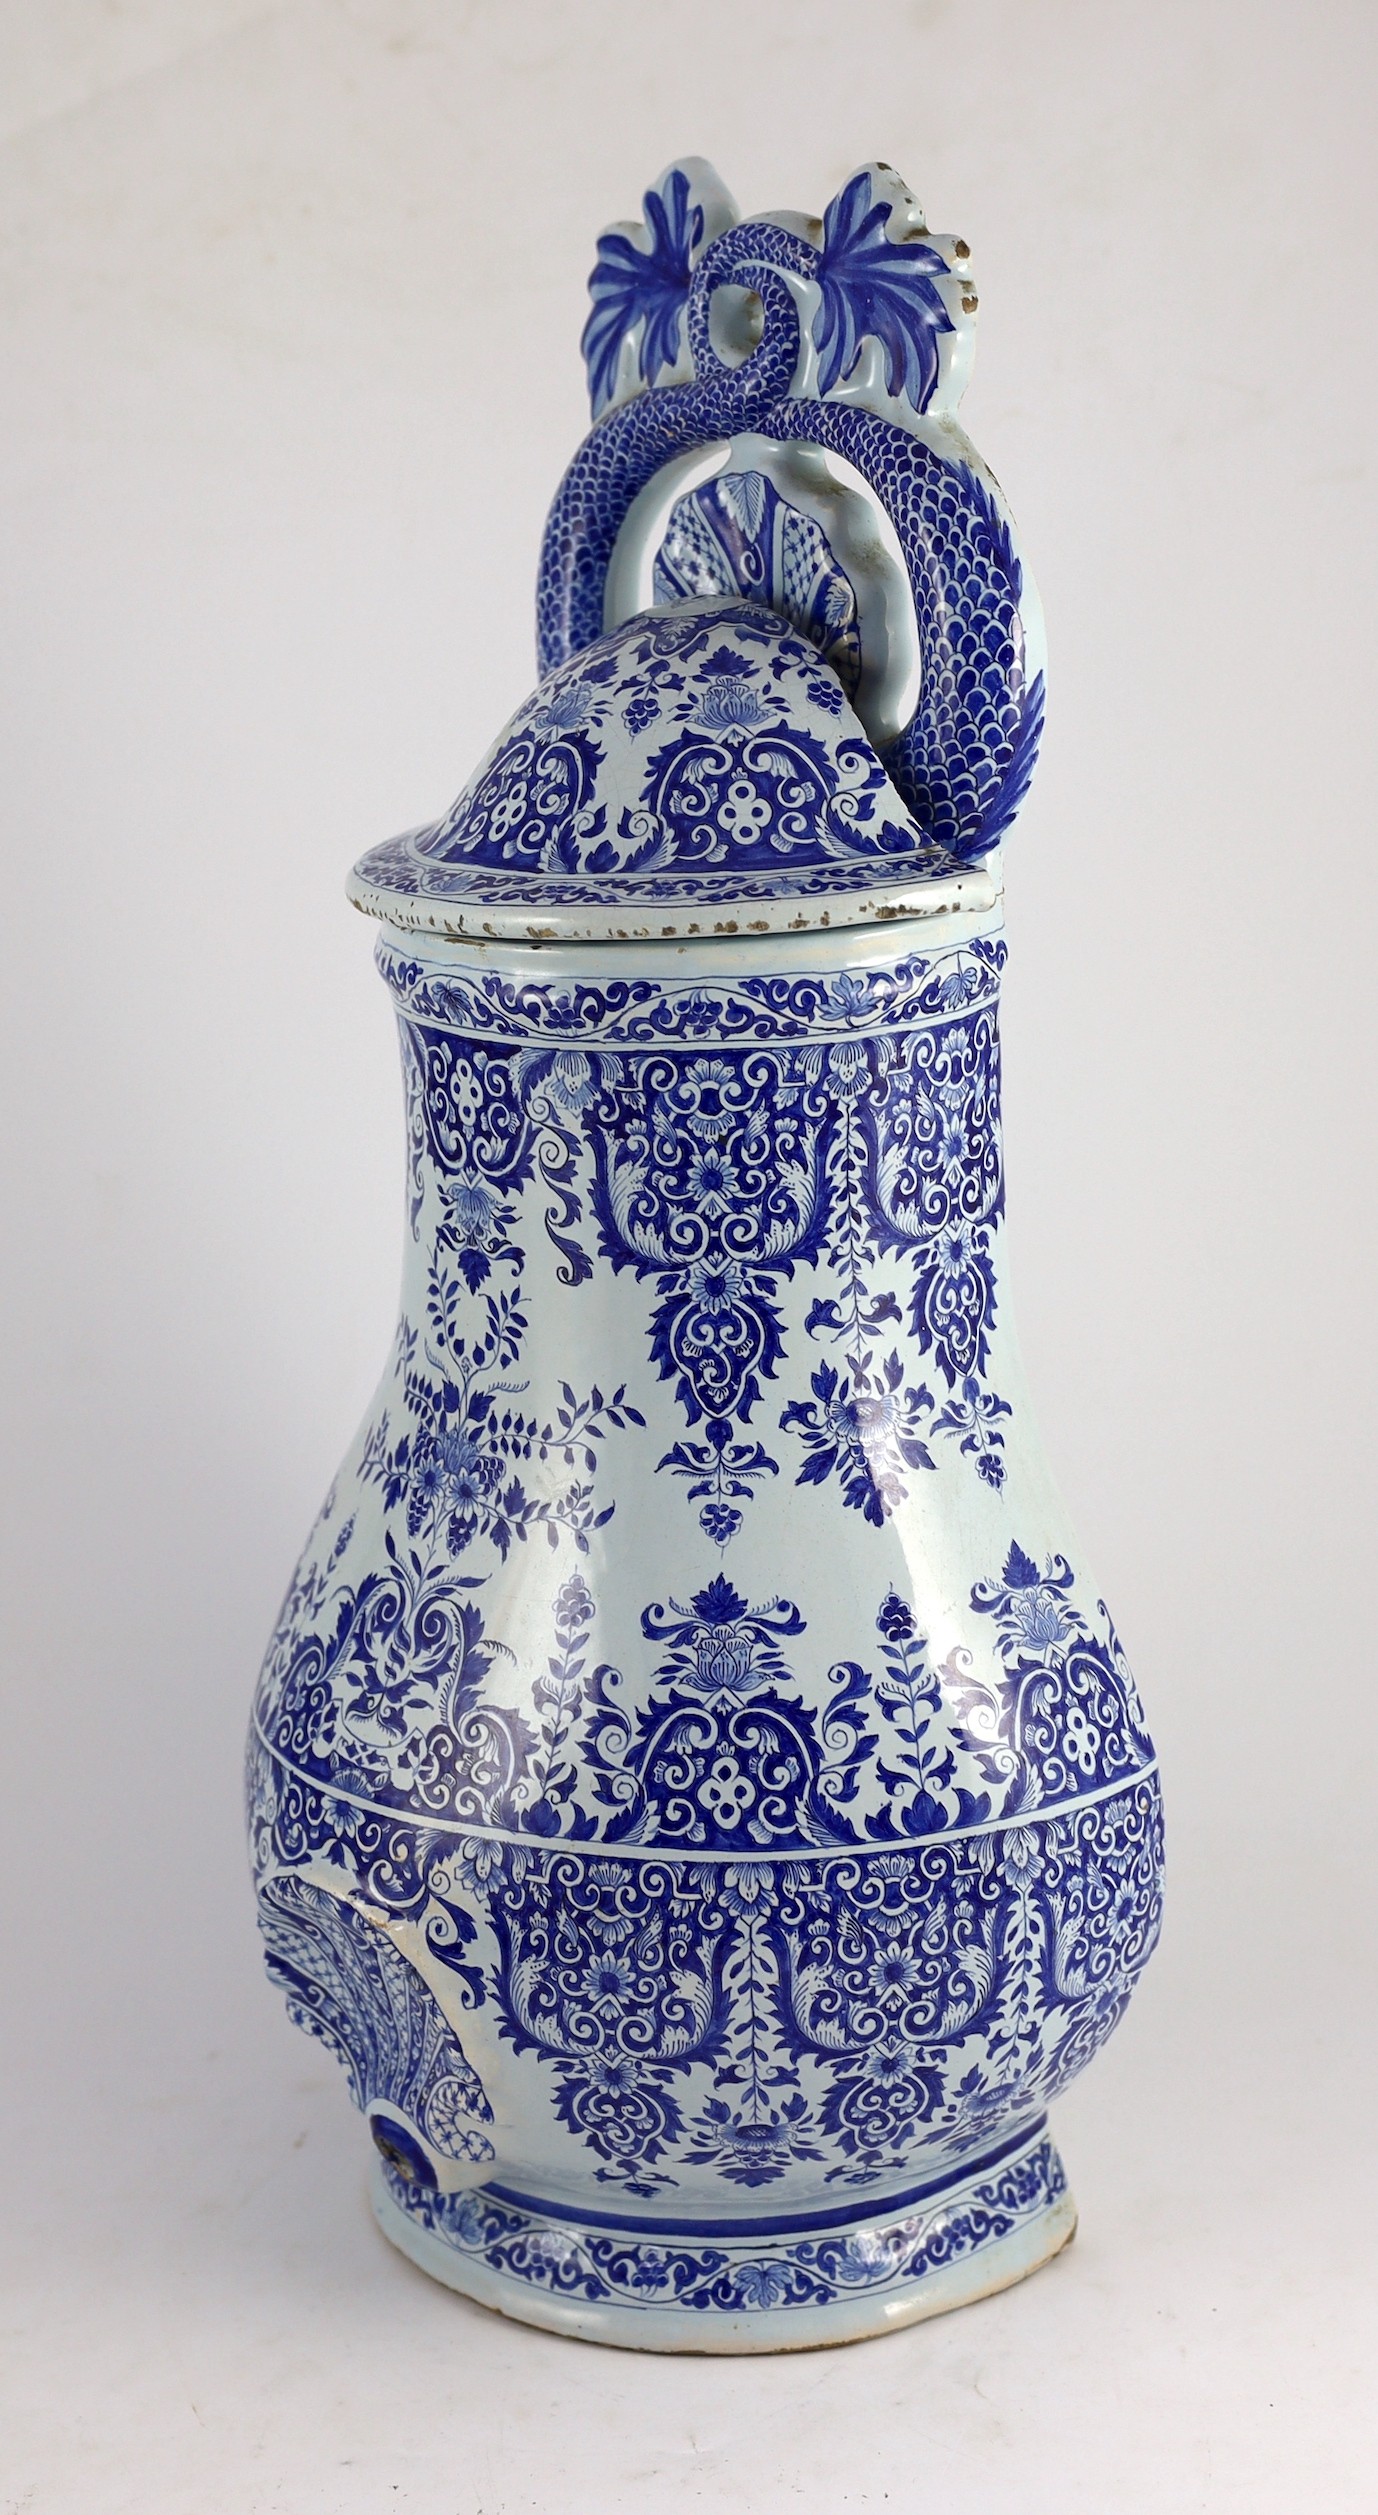 A large Rouen faience blue and white cistern, second quarter 18th century, 57.5cm high, restorations